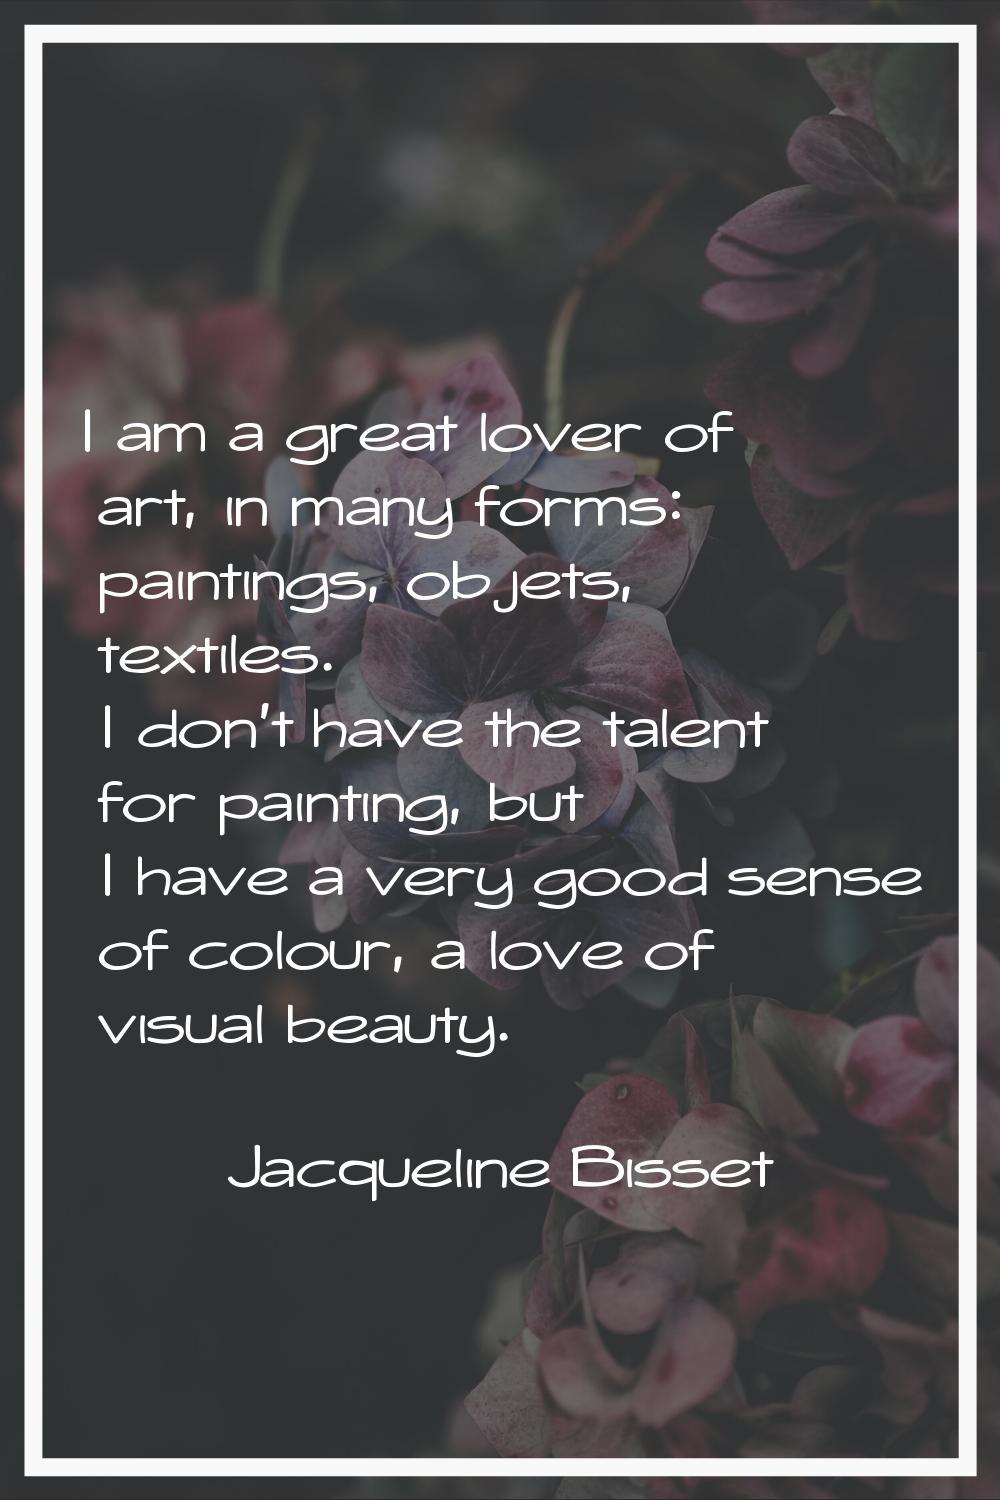 I am a great lover of art, in many forms: paintings, objets, textiles. I don't have the talent for 